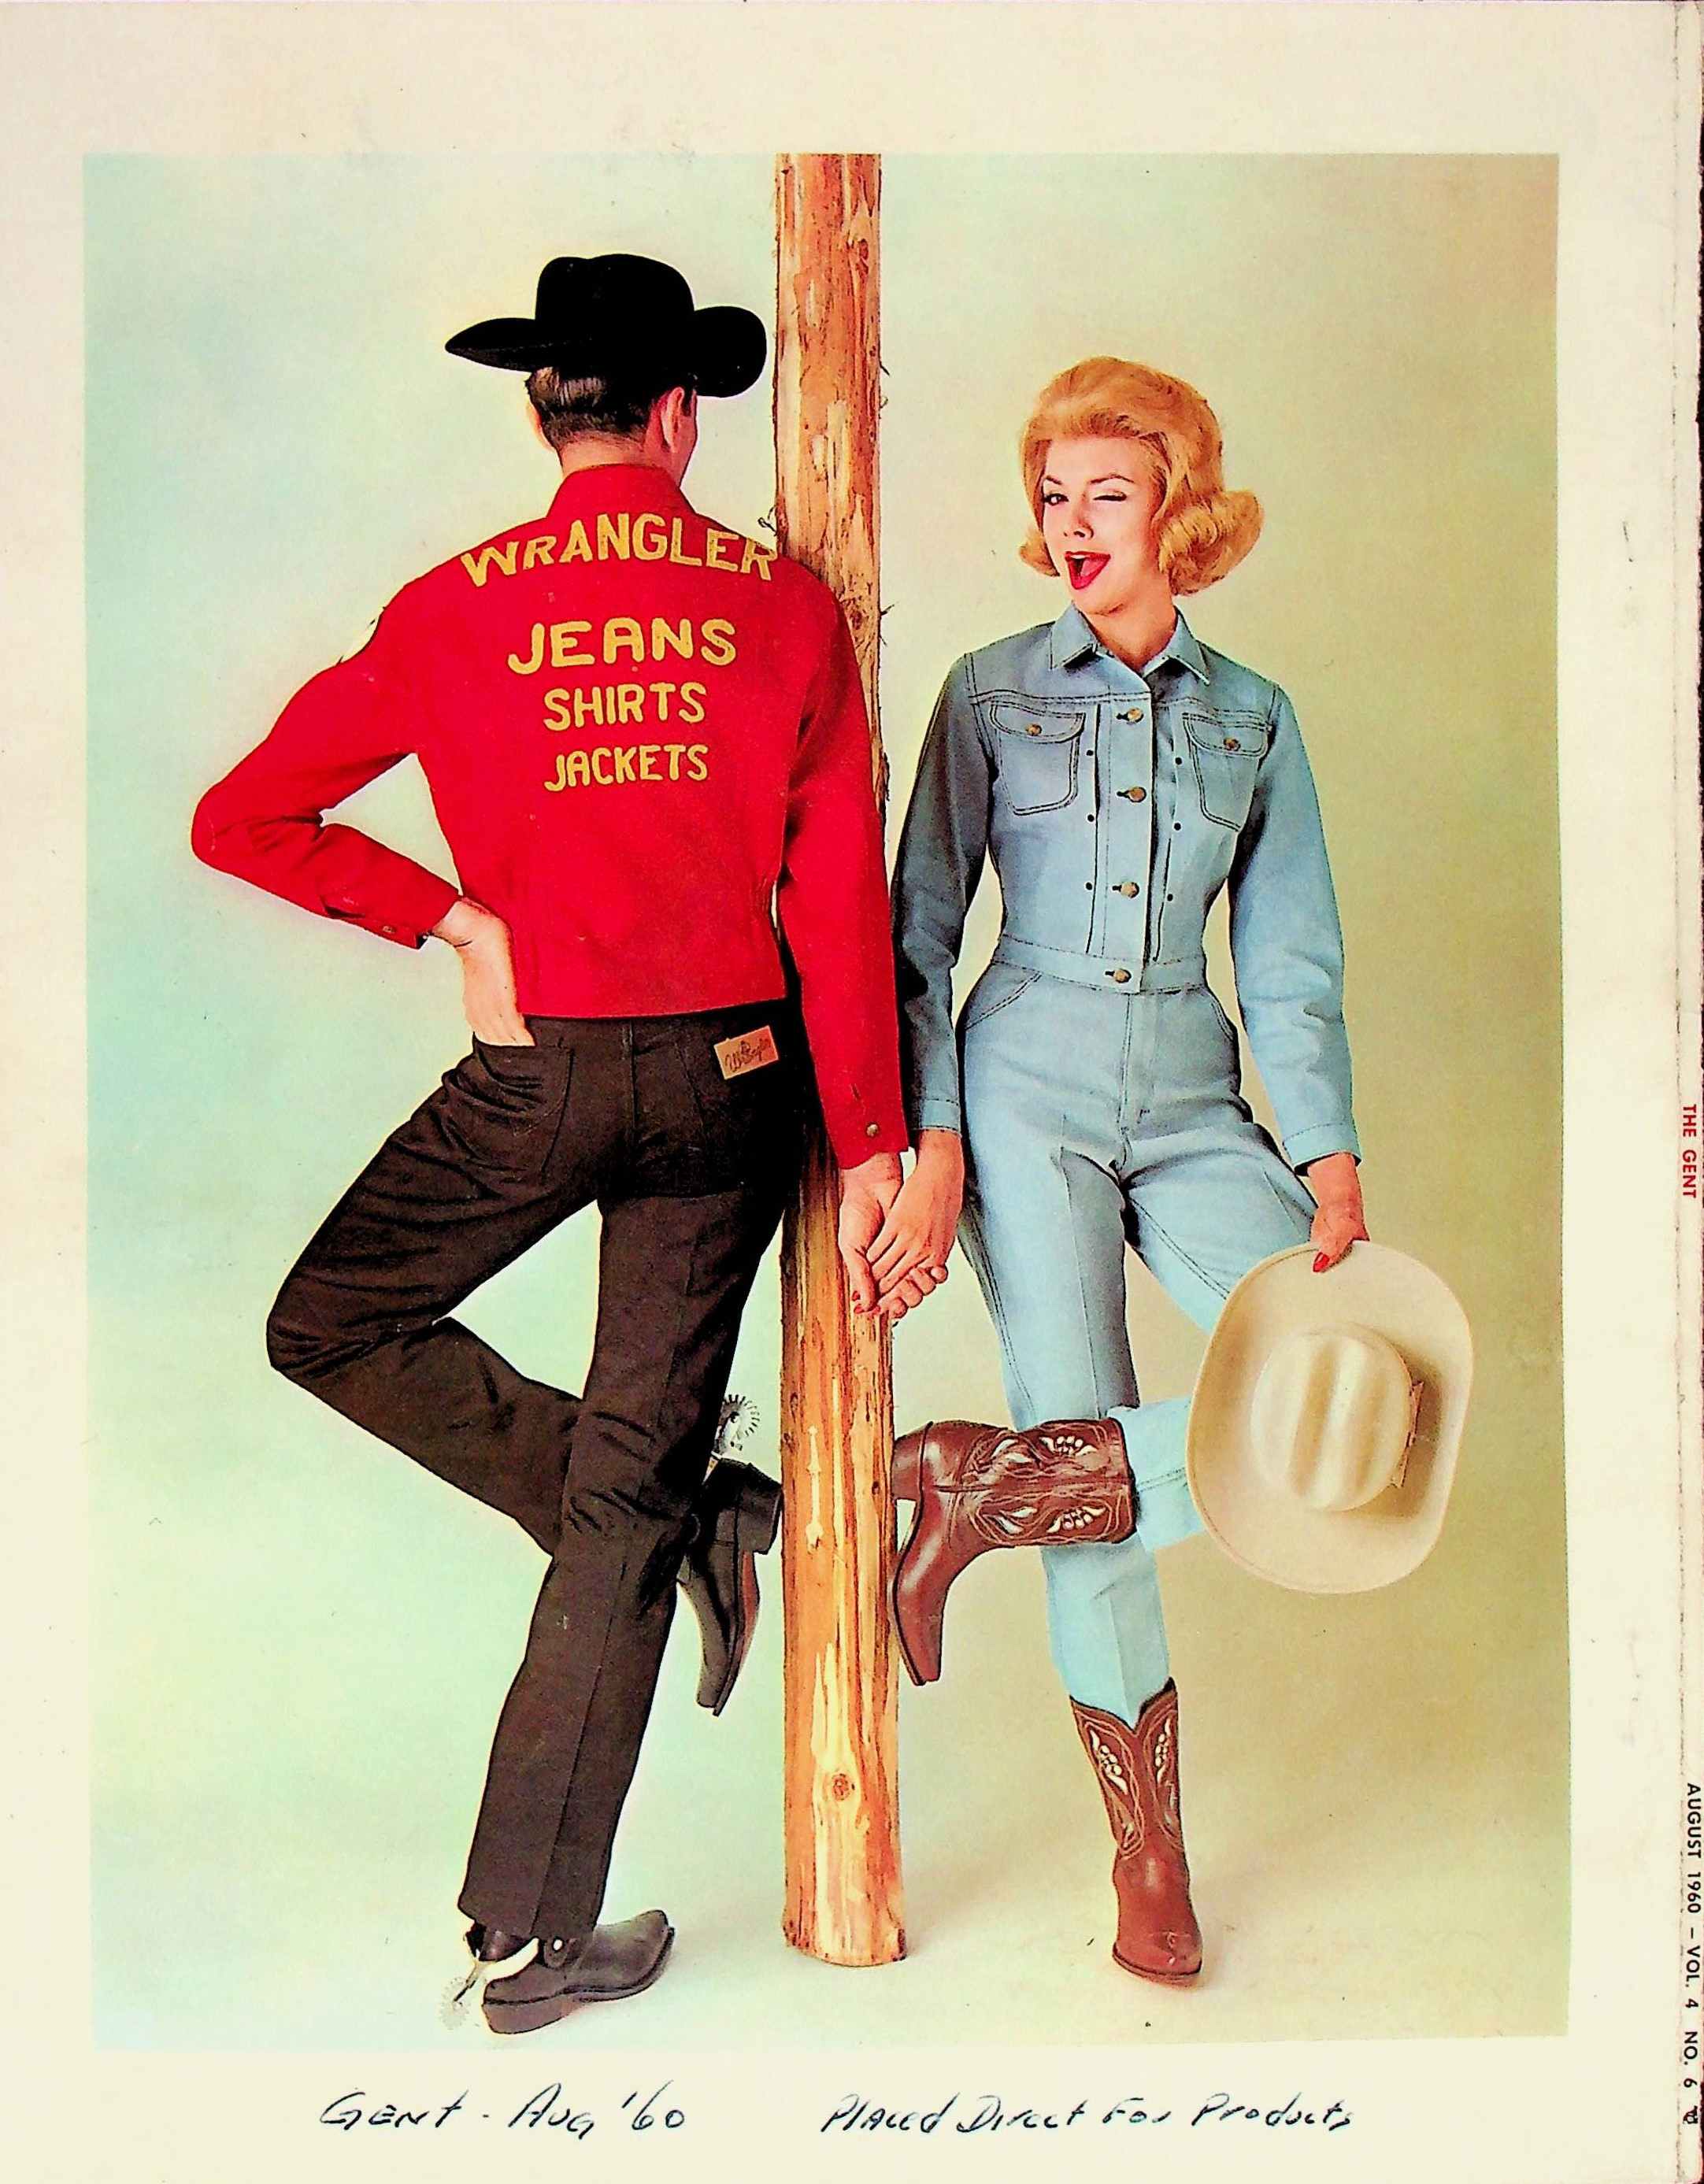 Wrangler® Brings Back the Classics in New Reissue Collection | Business Wire